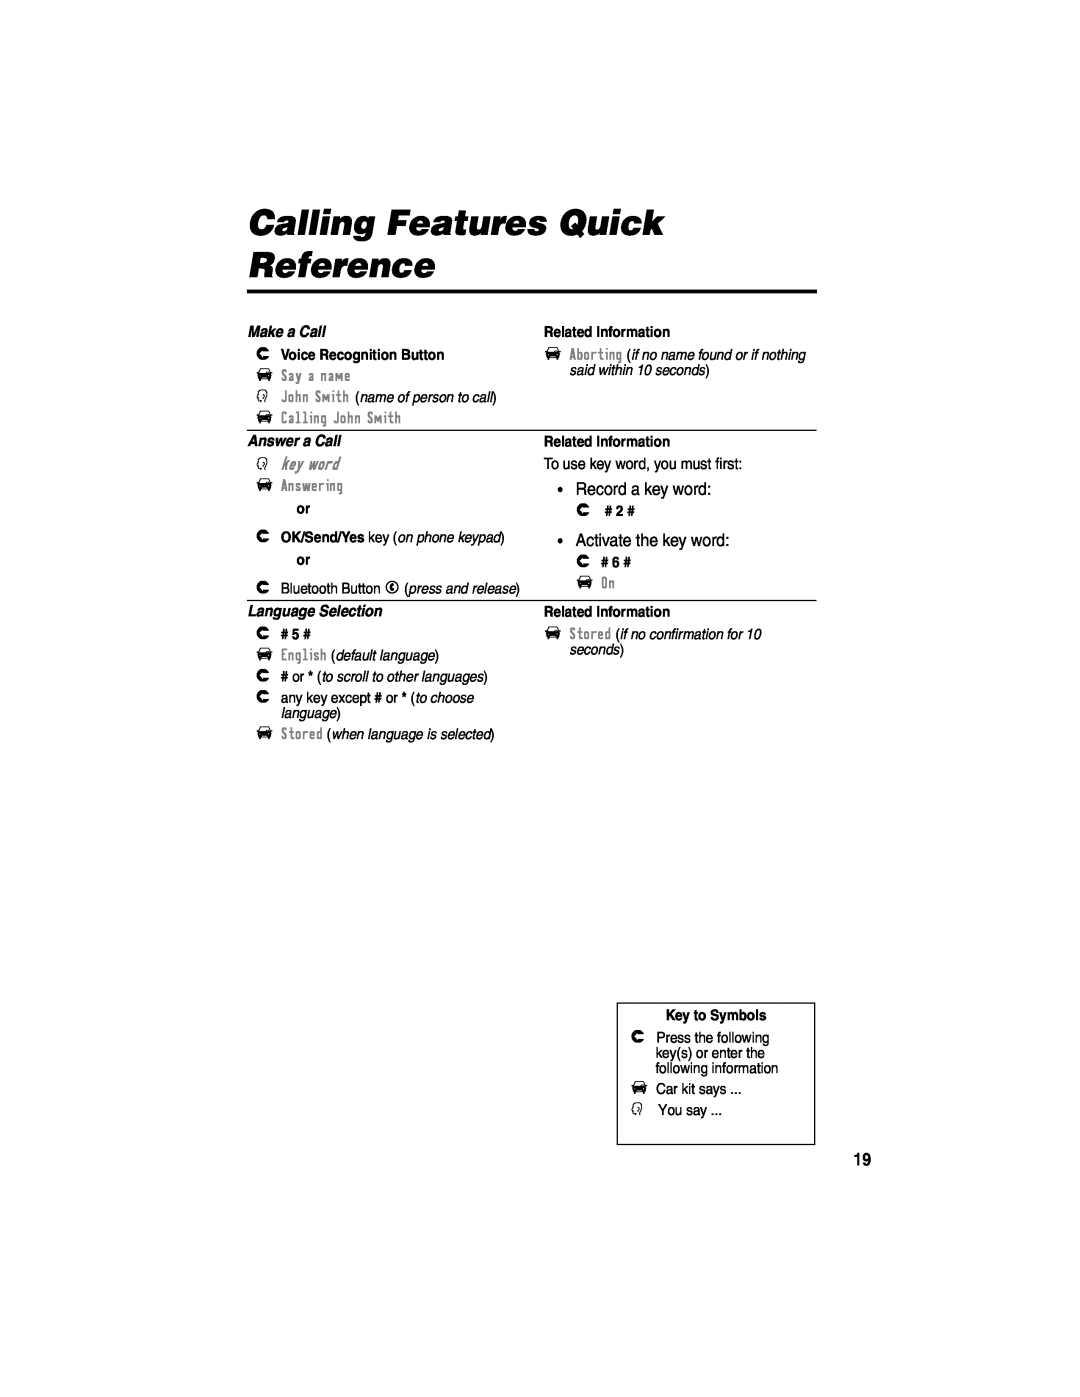 Motorola 89589N Calling Features Quick Reference, Make a Call, Answer a Call, Language Selection, Gkey word, F On, H # 2 # 